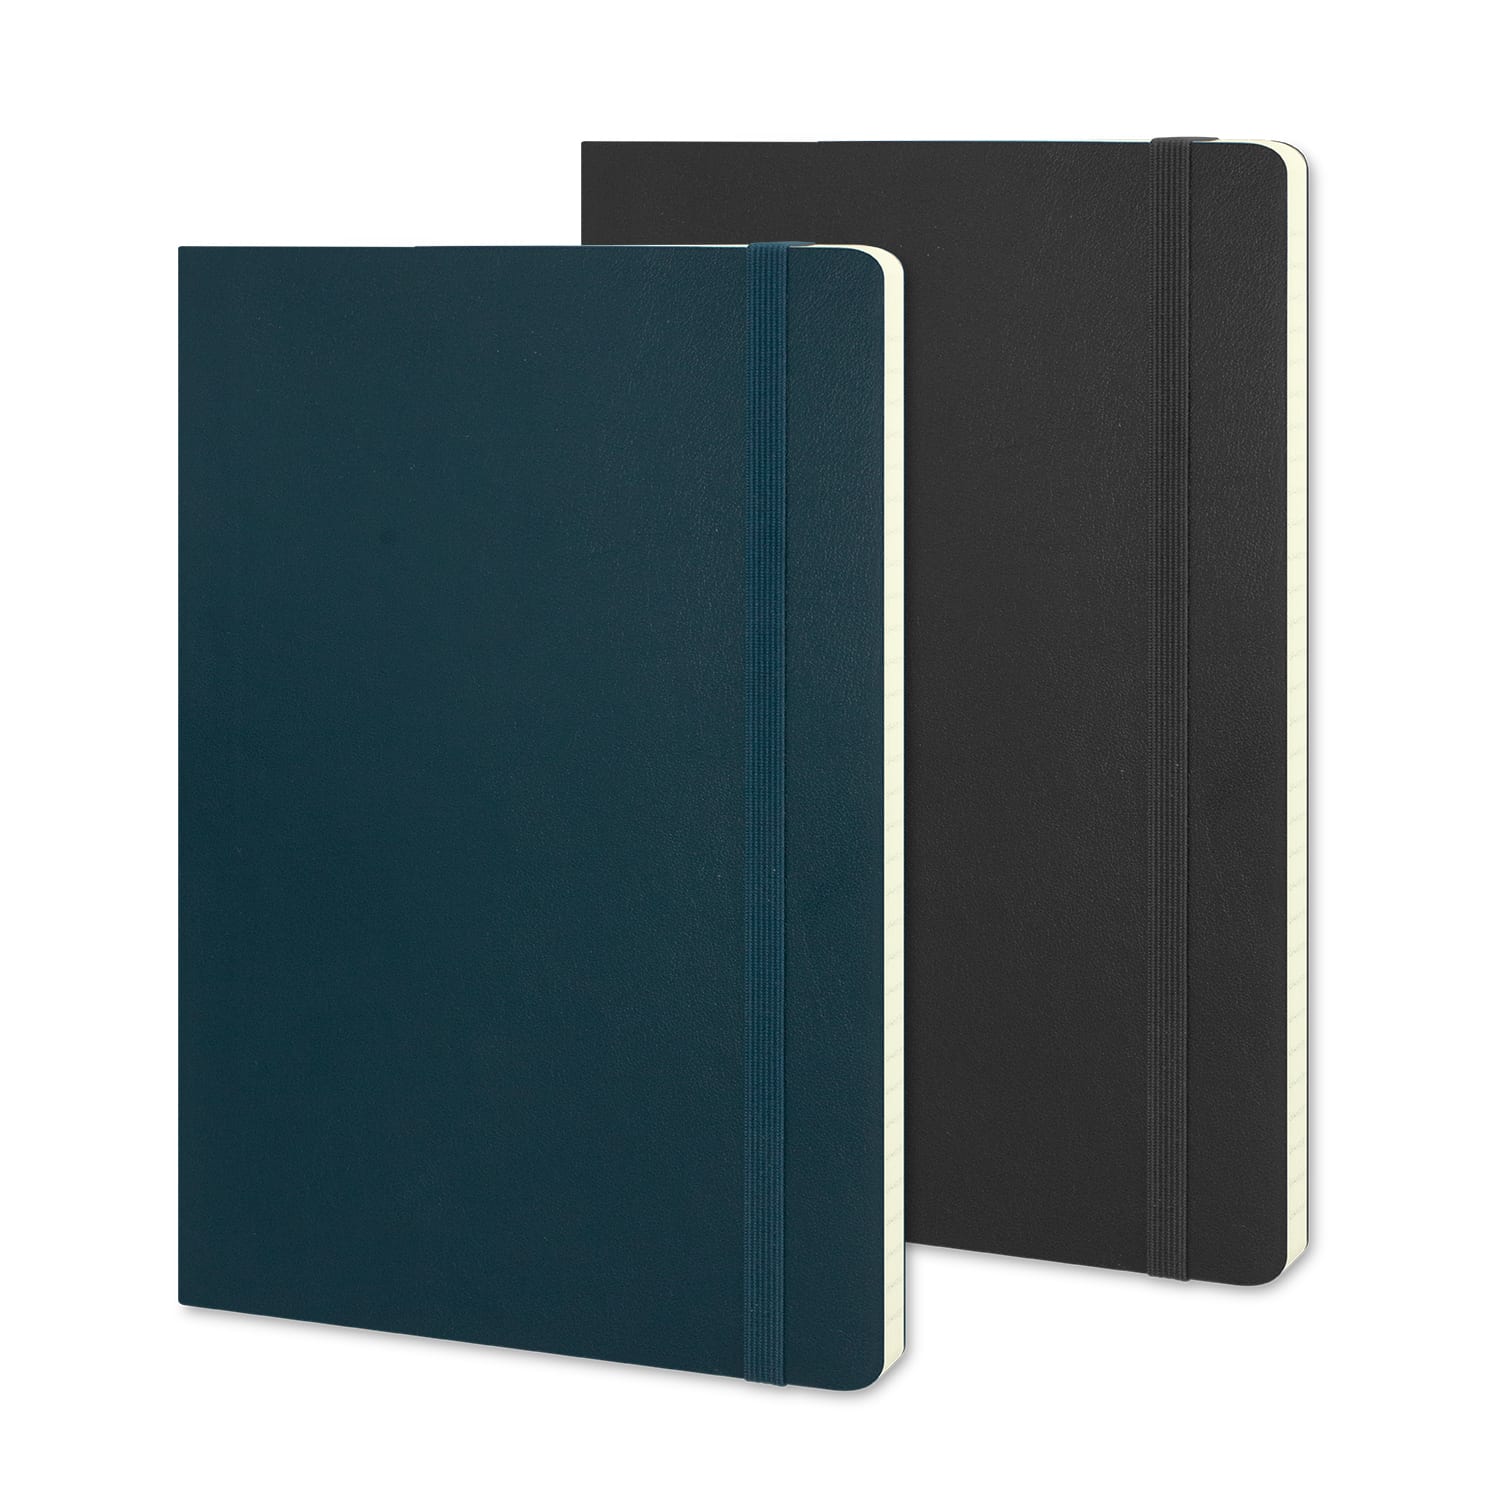 LUXE GIFT RANGE Moleskine Classic Soft Cover Notebook – Large classic